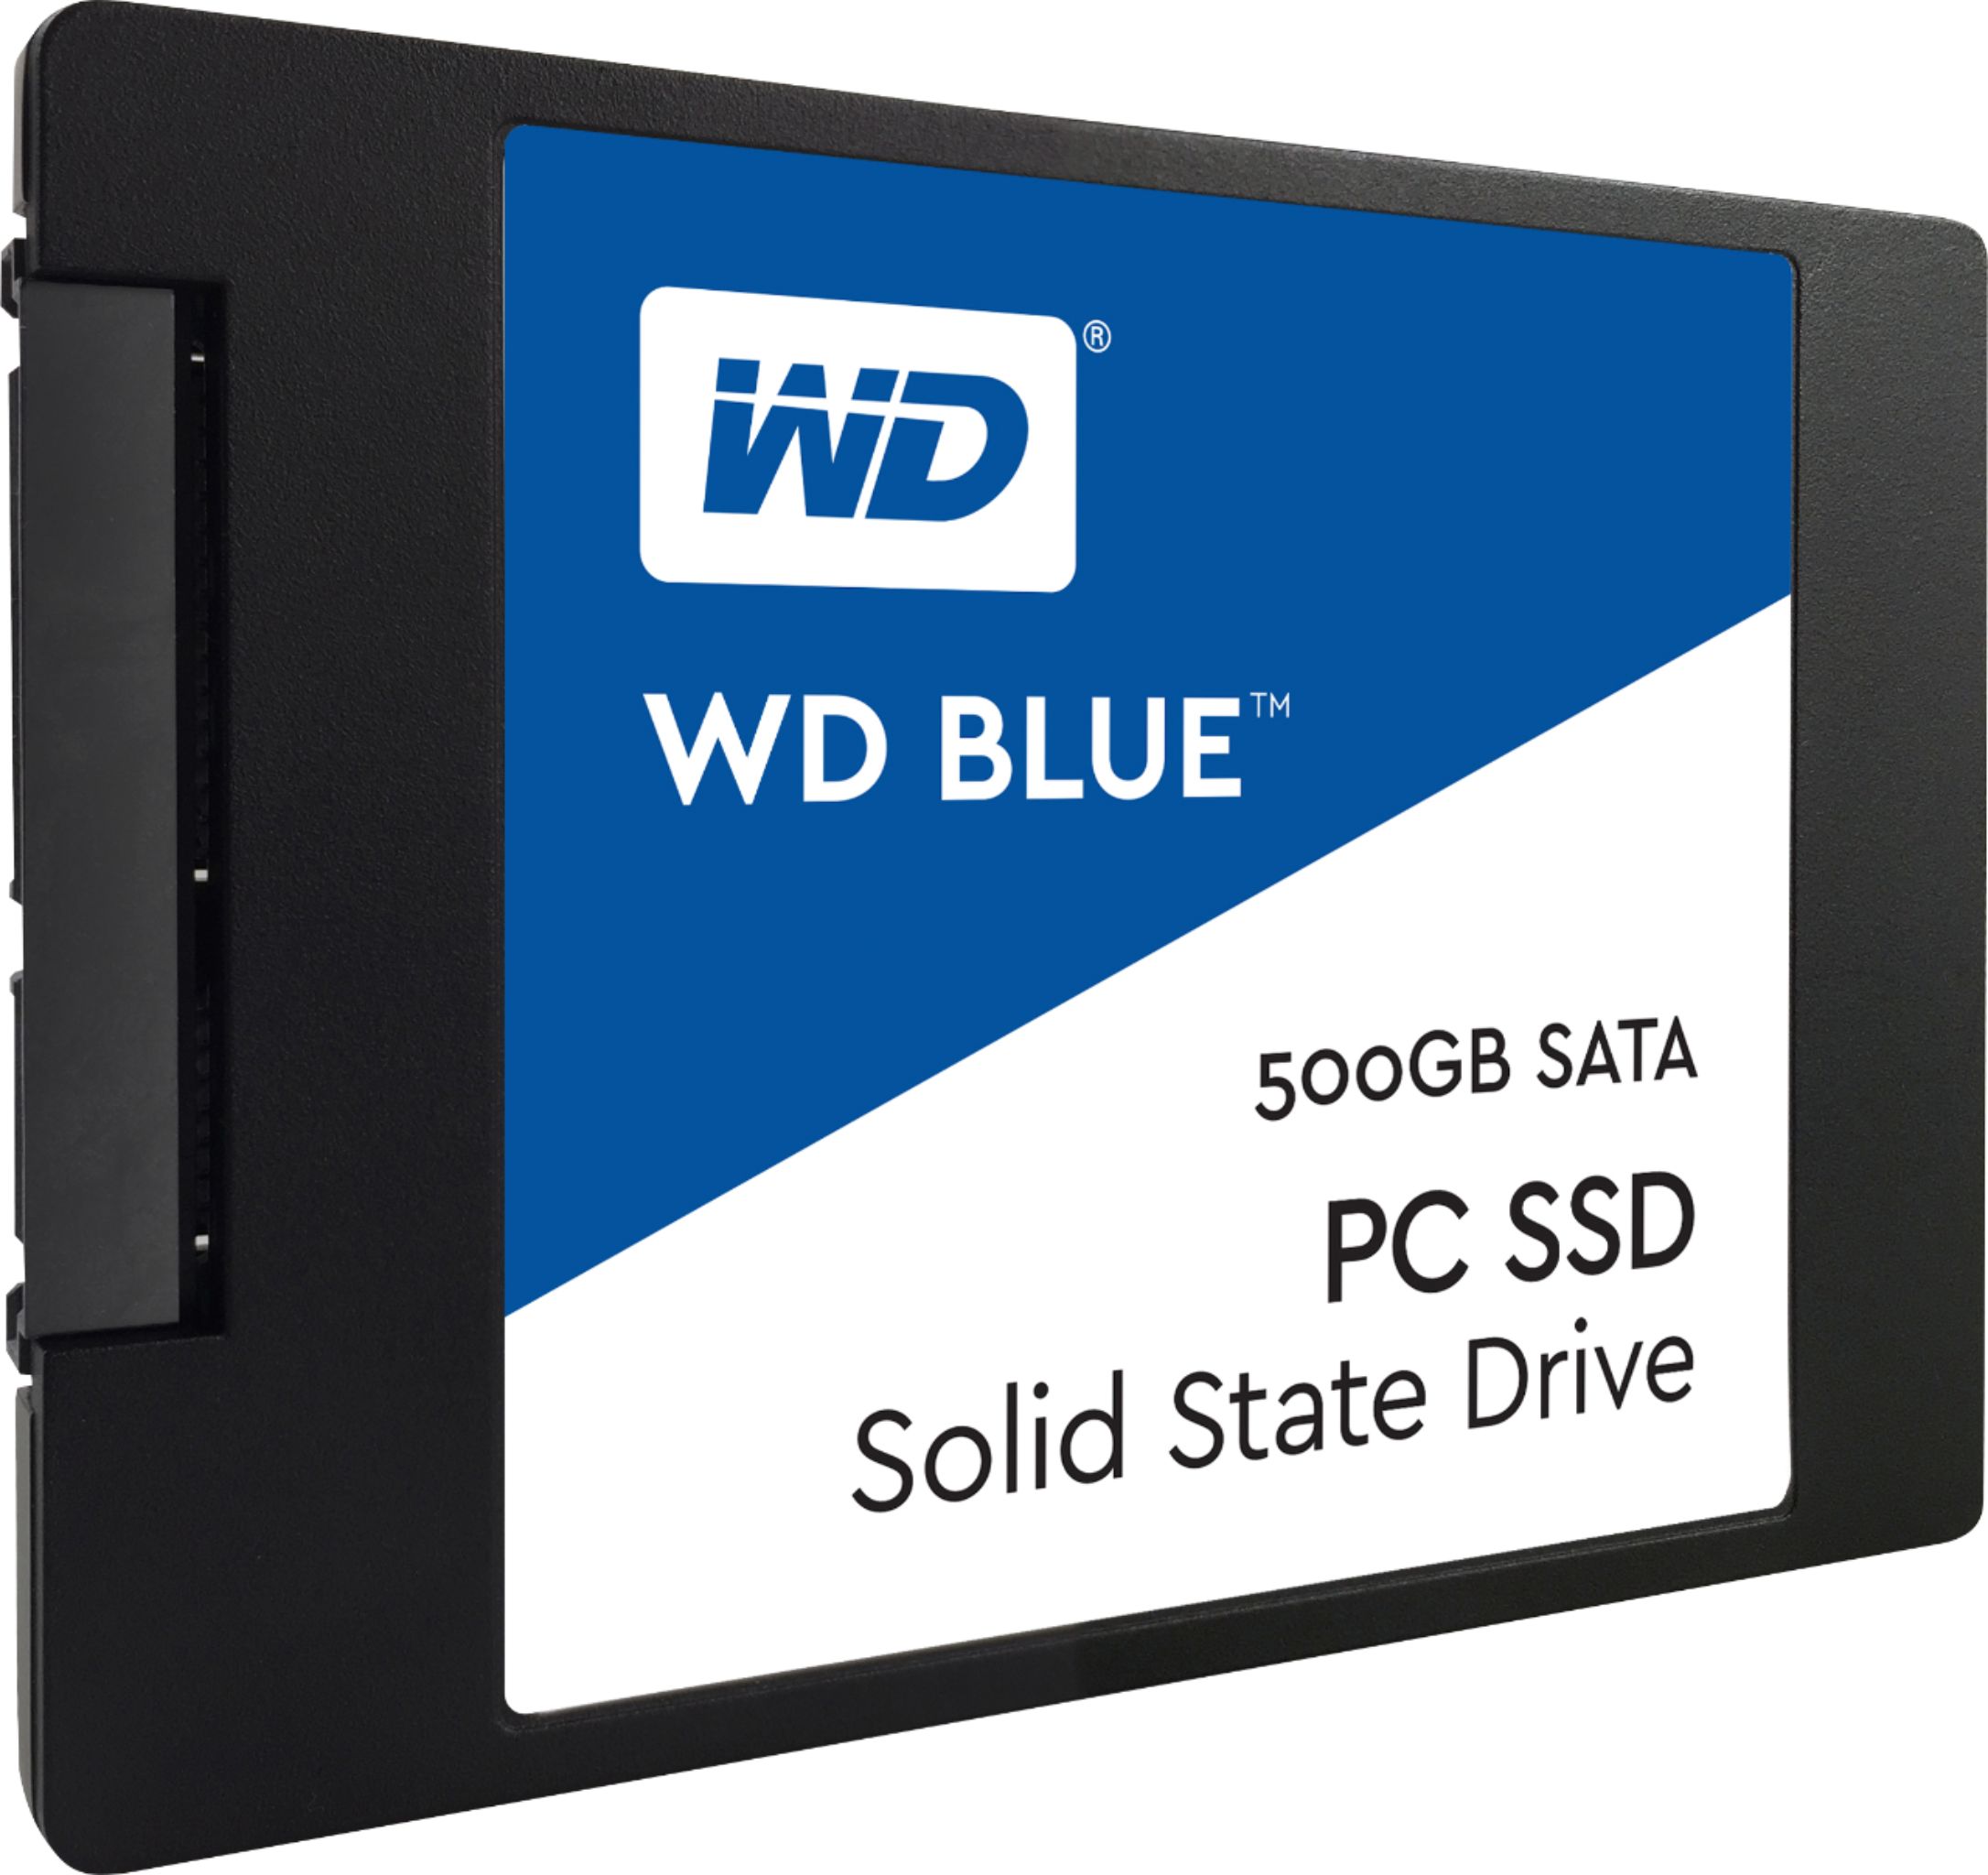 Buy 500GB SSD with Fast Processing Speed 